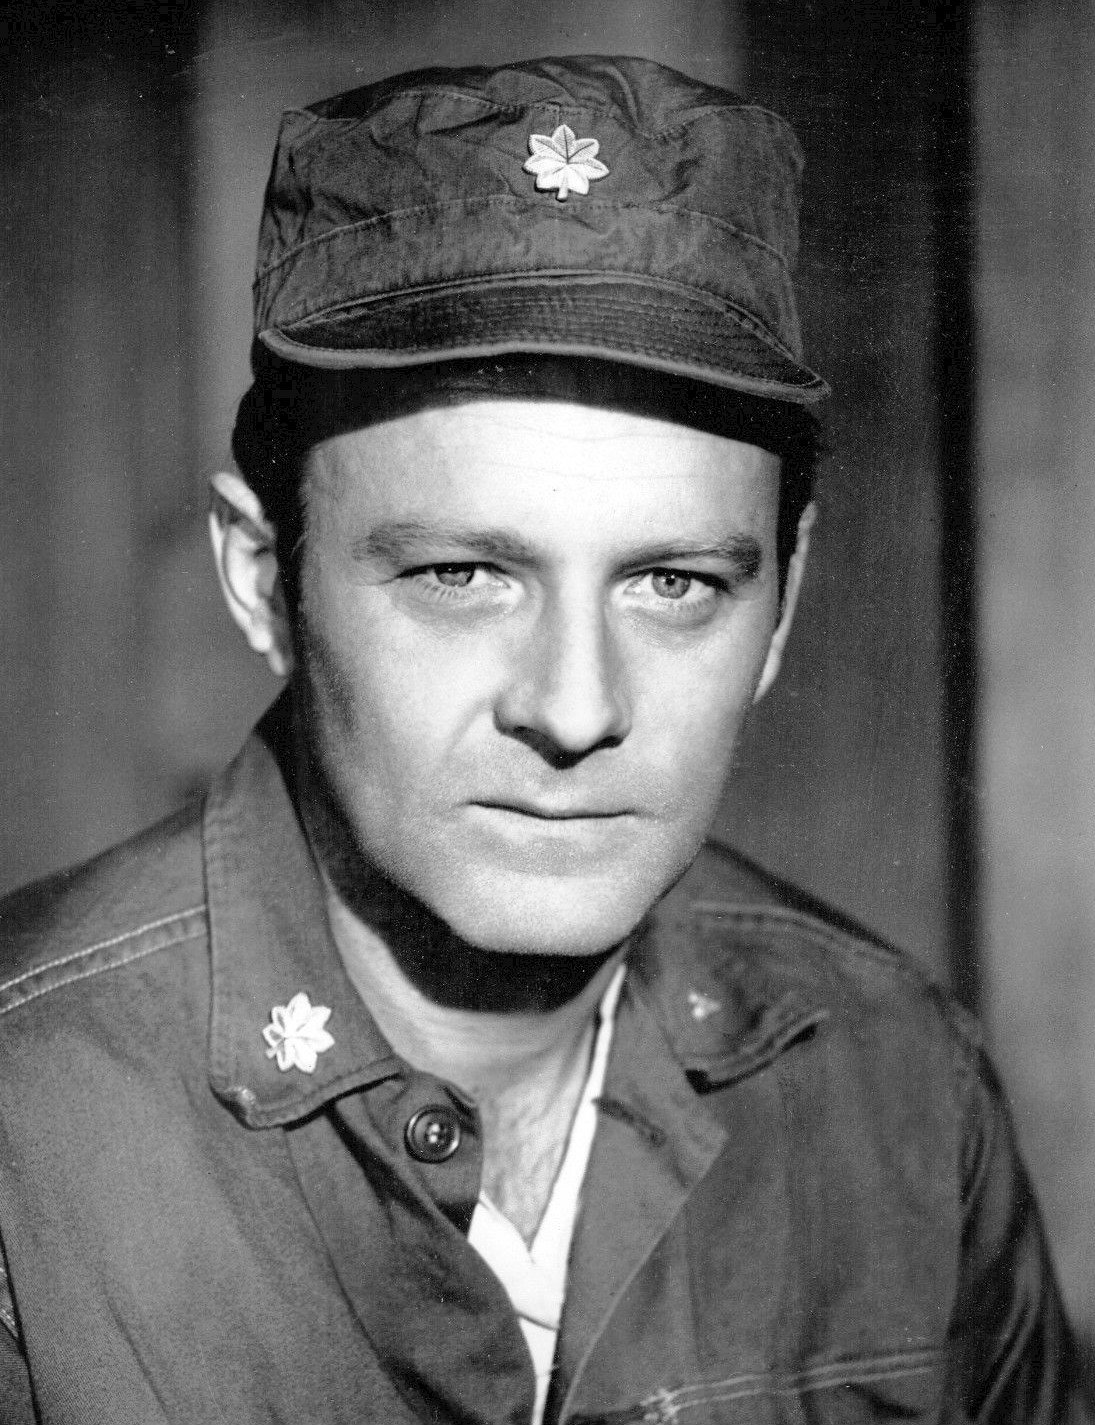 Larry Linville as Major Frank Burns from the television series M*A*S*H. | Source: Wikimedia Commons